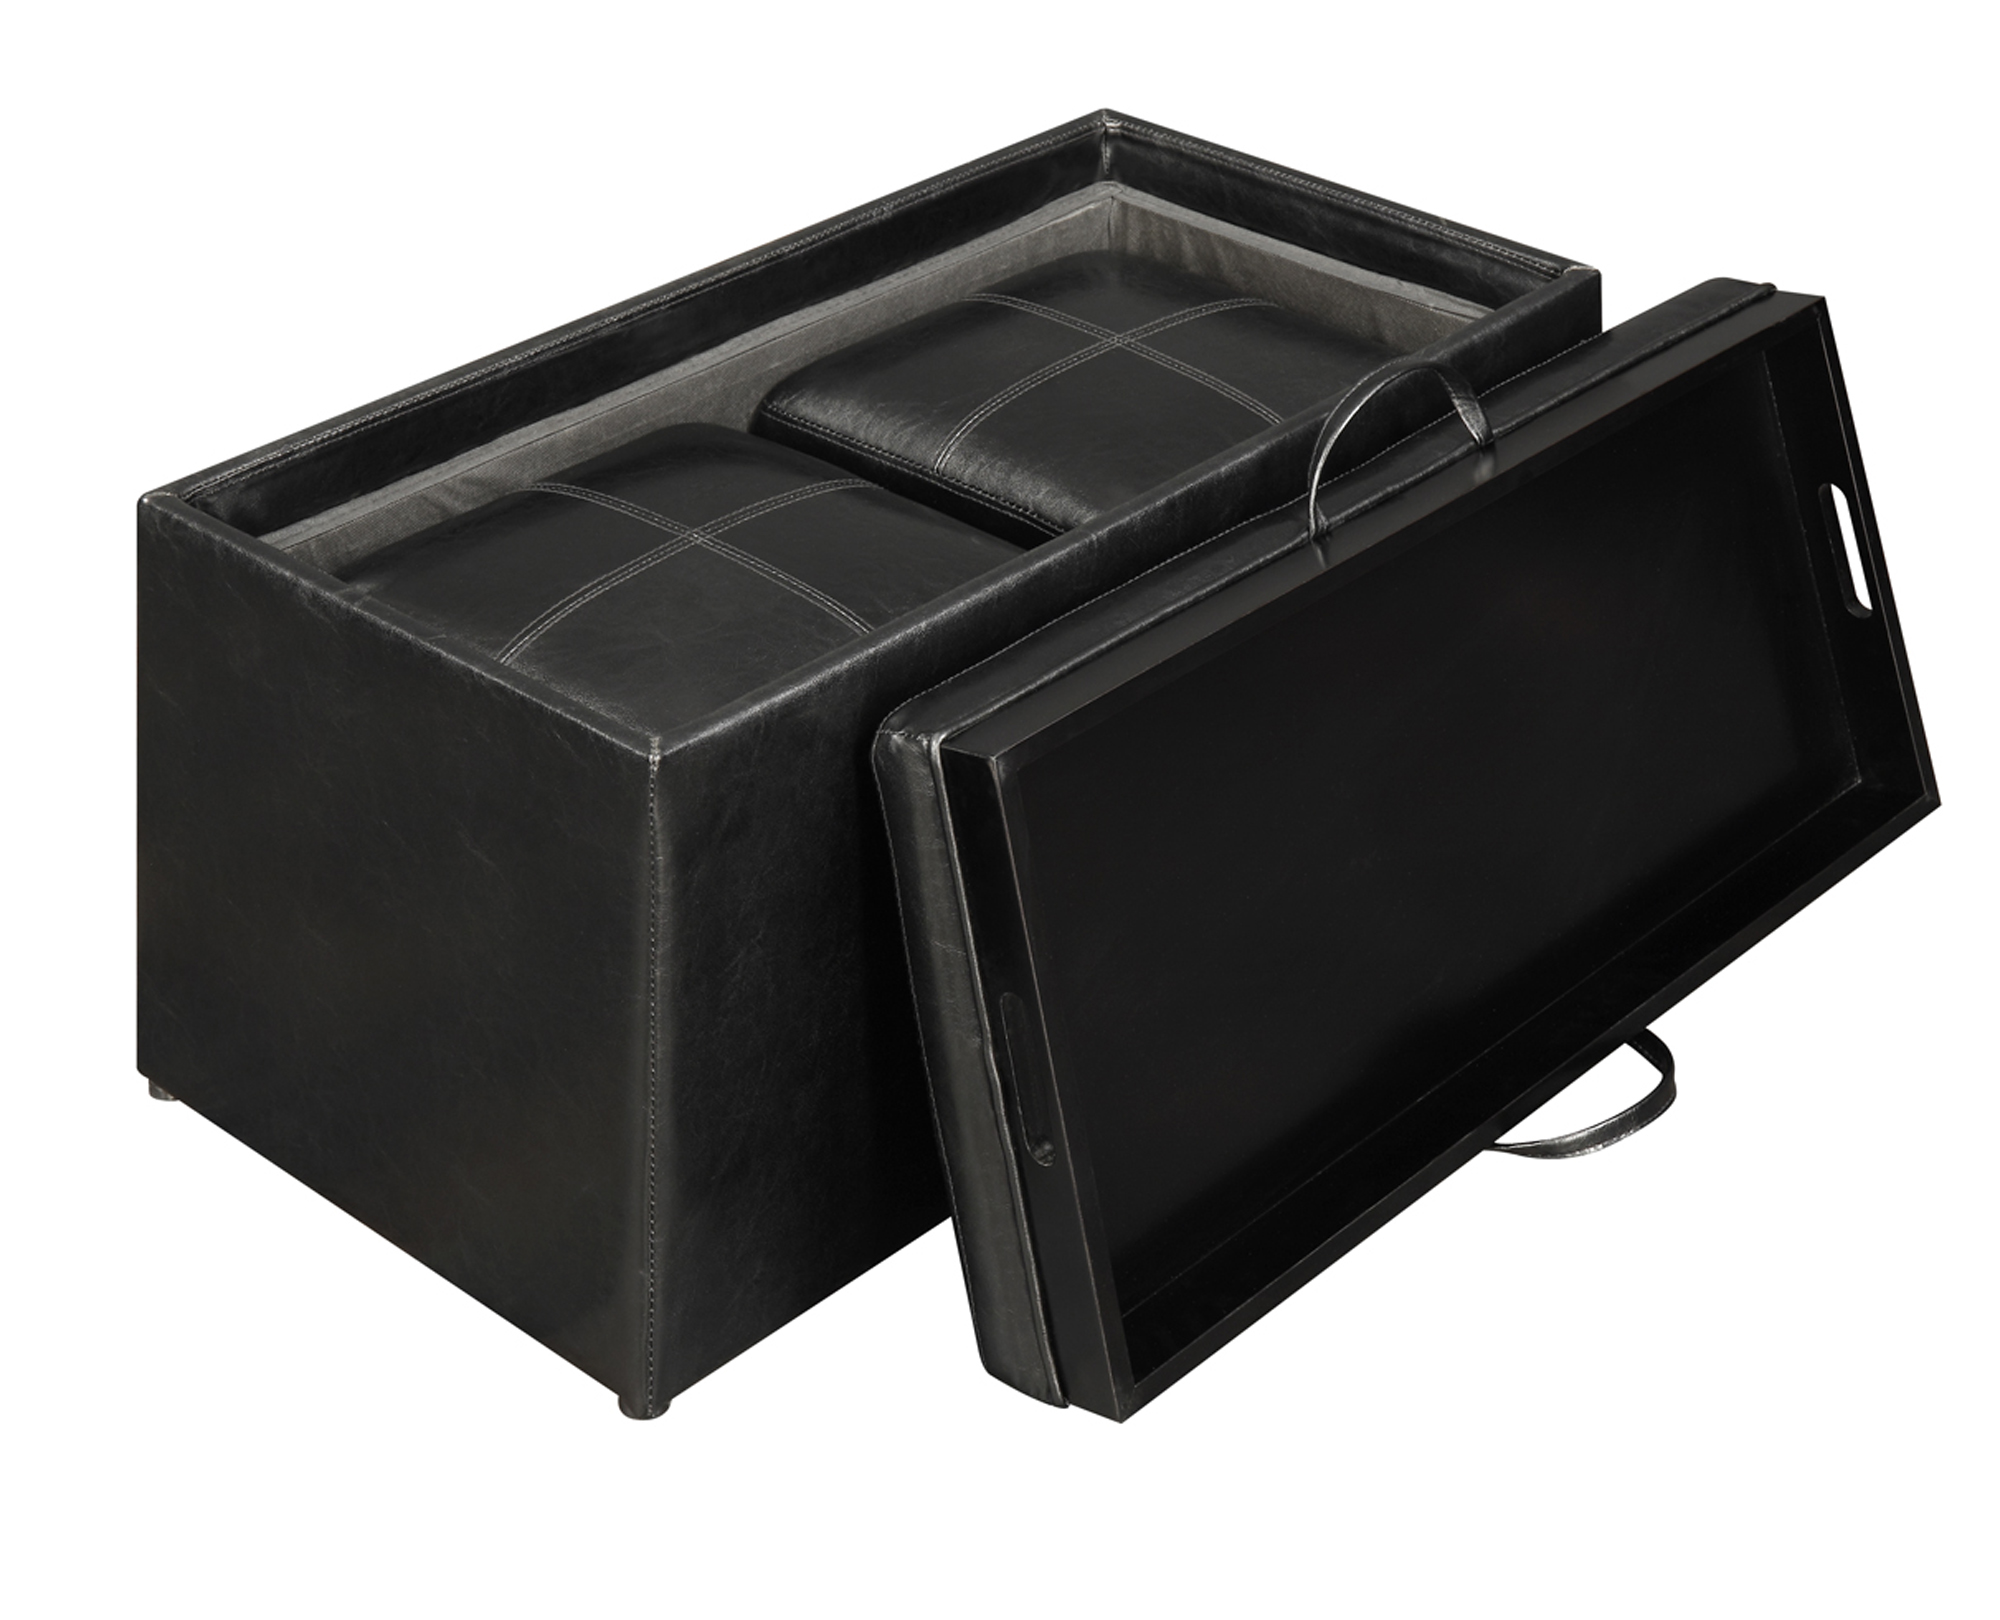 Convenience Concepts Designs4Comfort Sheridan Storage Bench with Reversible Tray and 2 Side Ottomans, Black Faux Leather - image 3 of 7